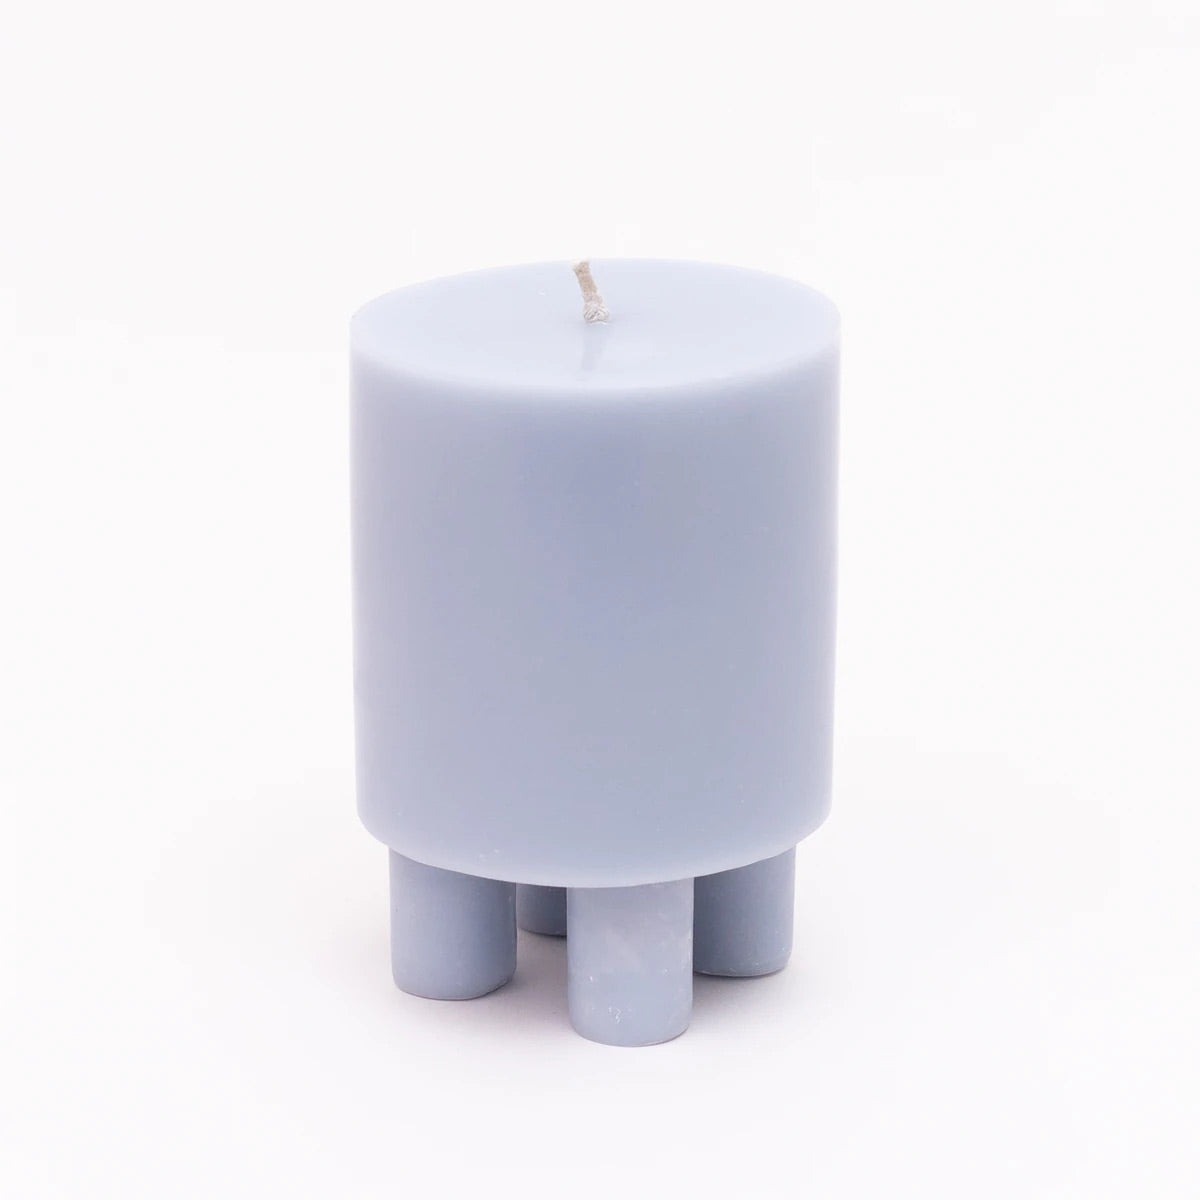 Stack Candle Prop - D